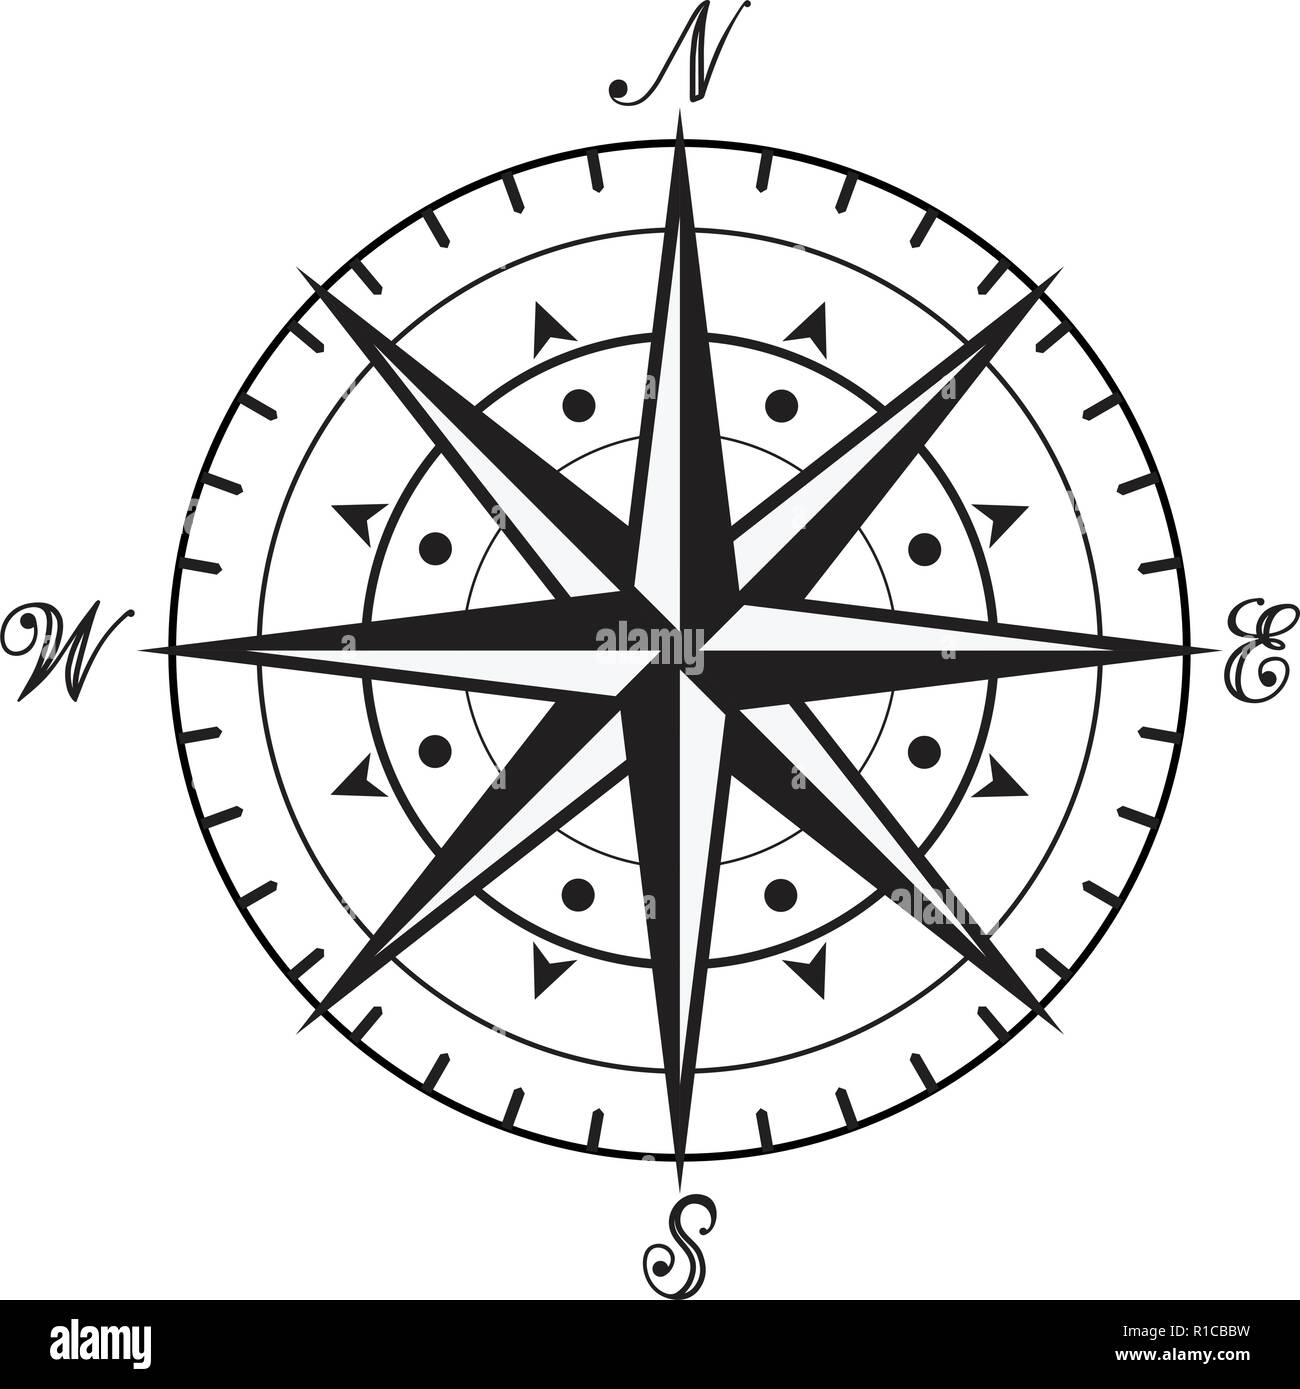 vector vintage black and white compass isolated on white background. maritime map icon. north, south, east and west wind-rose arrow directions. advent Stock Vector